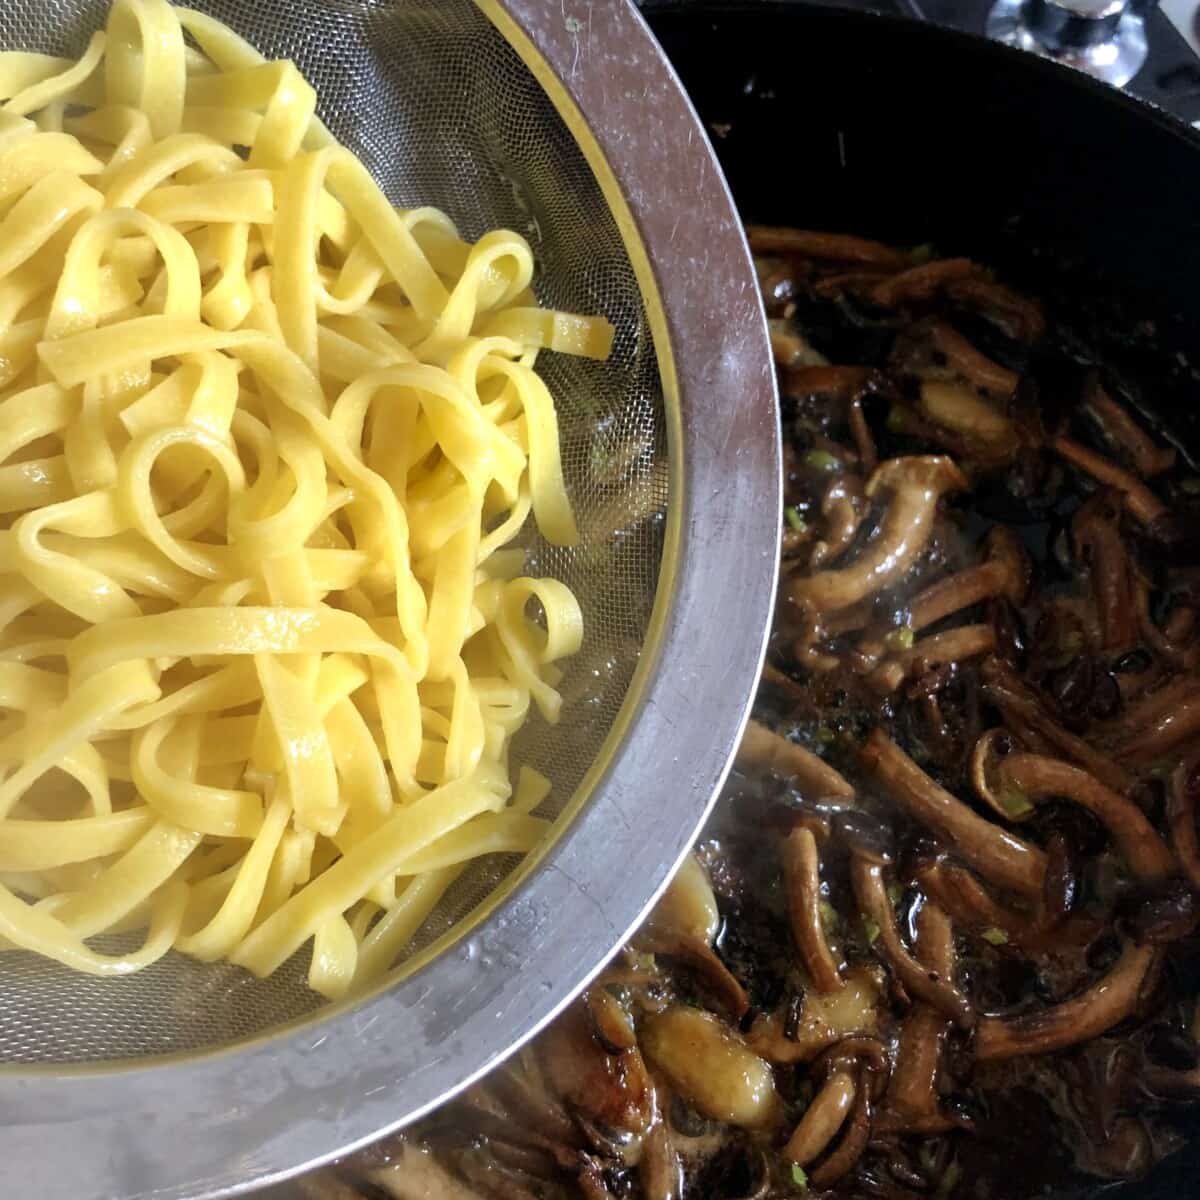 just cooked fettuccine noodles being added to the mushroom sauce